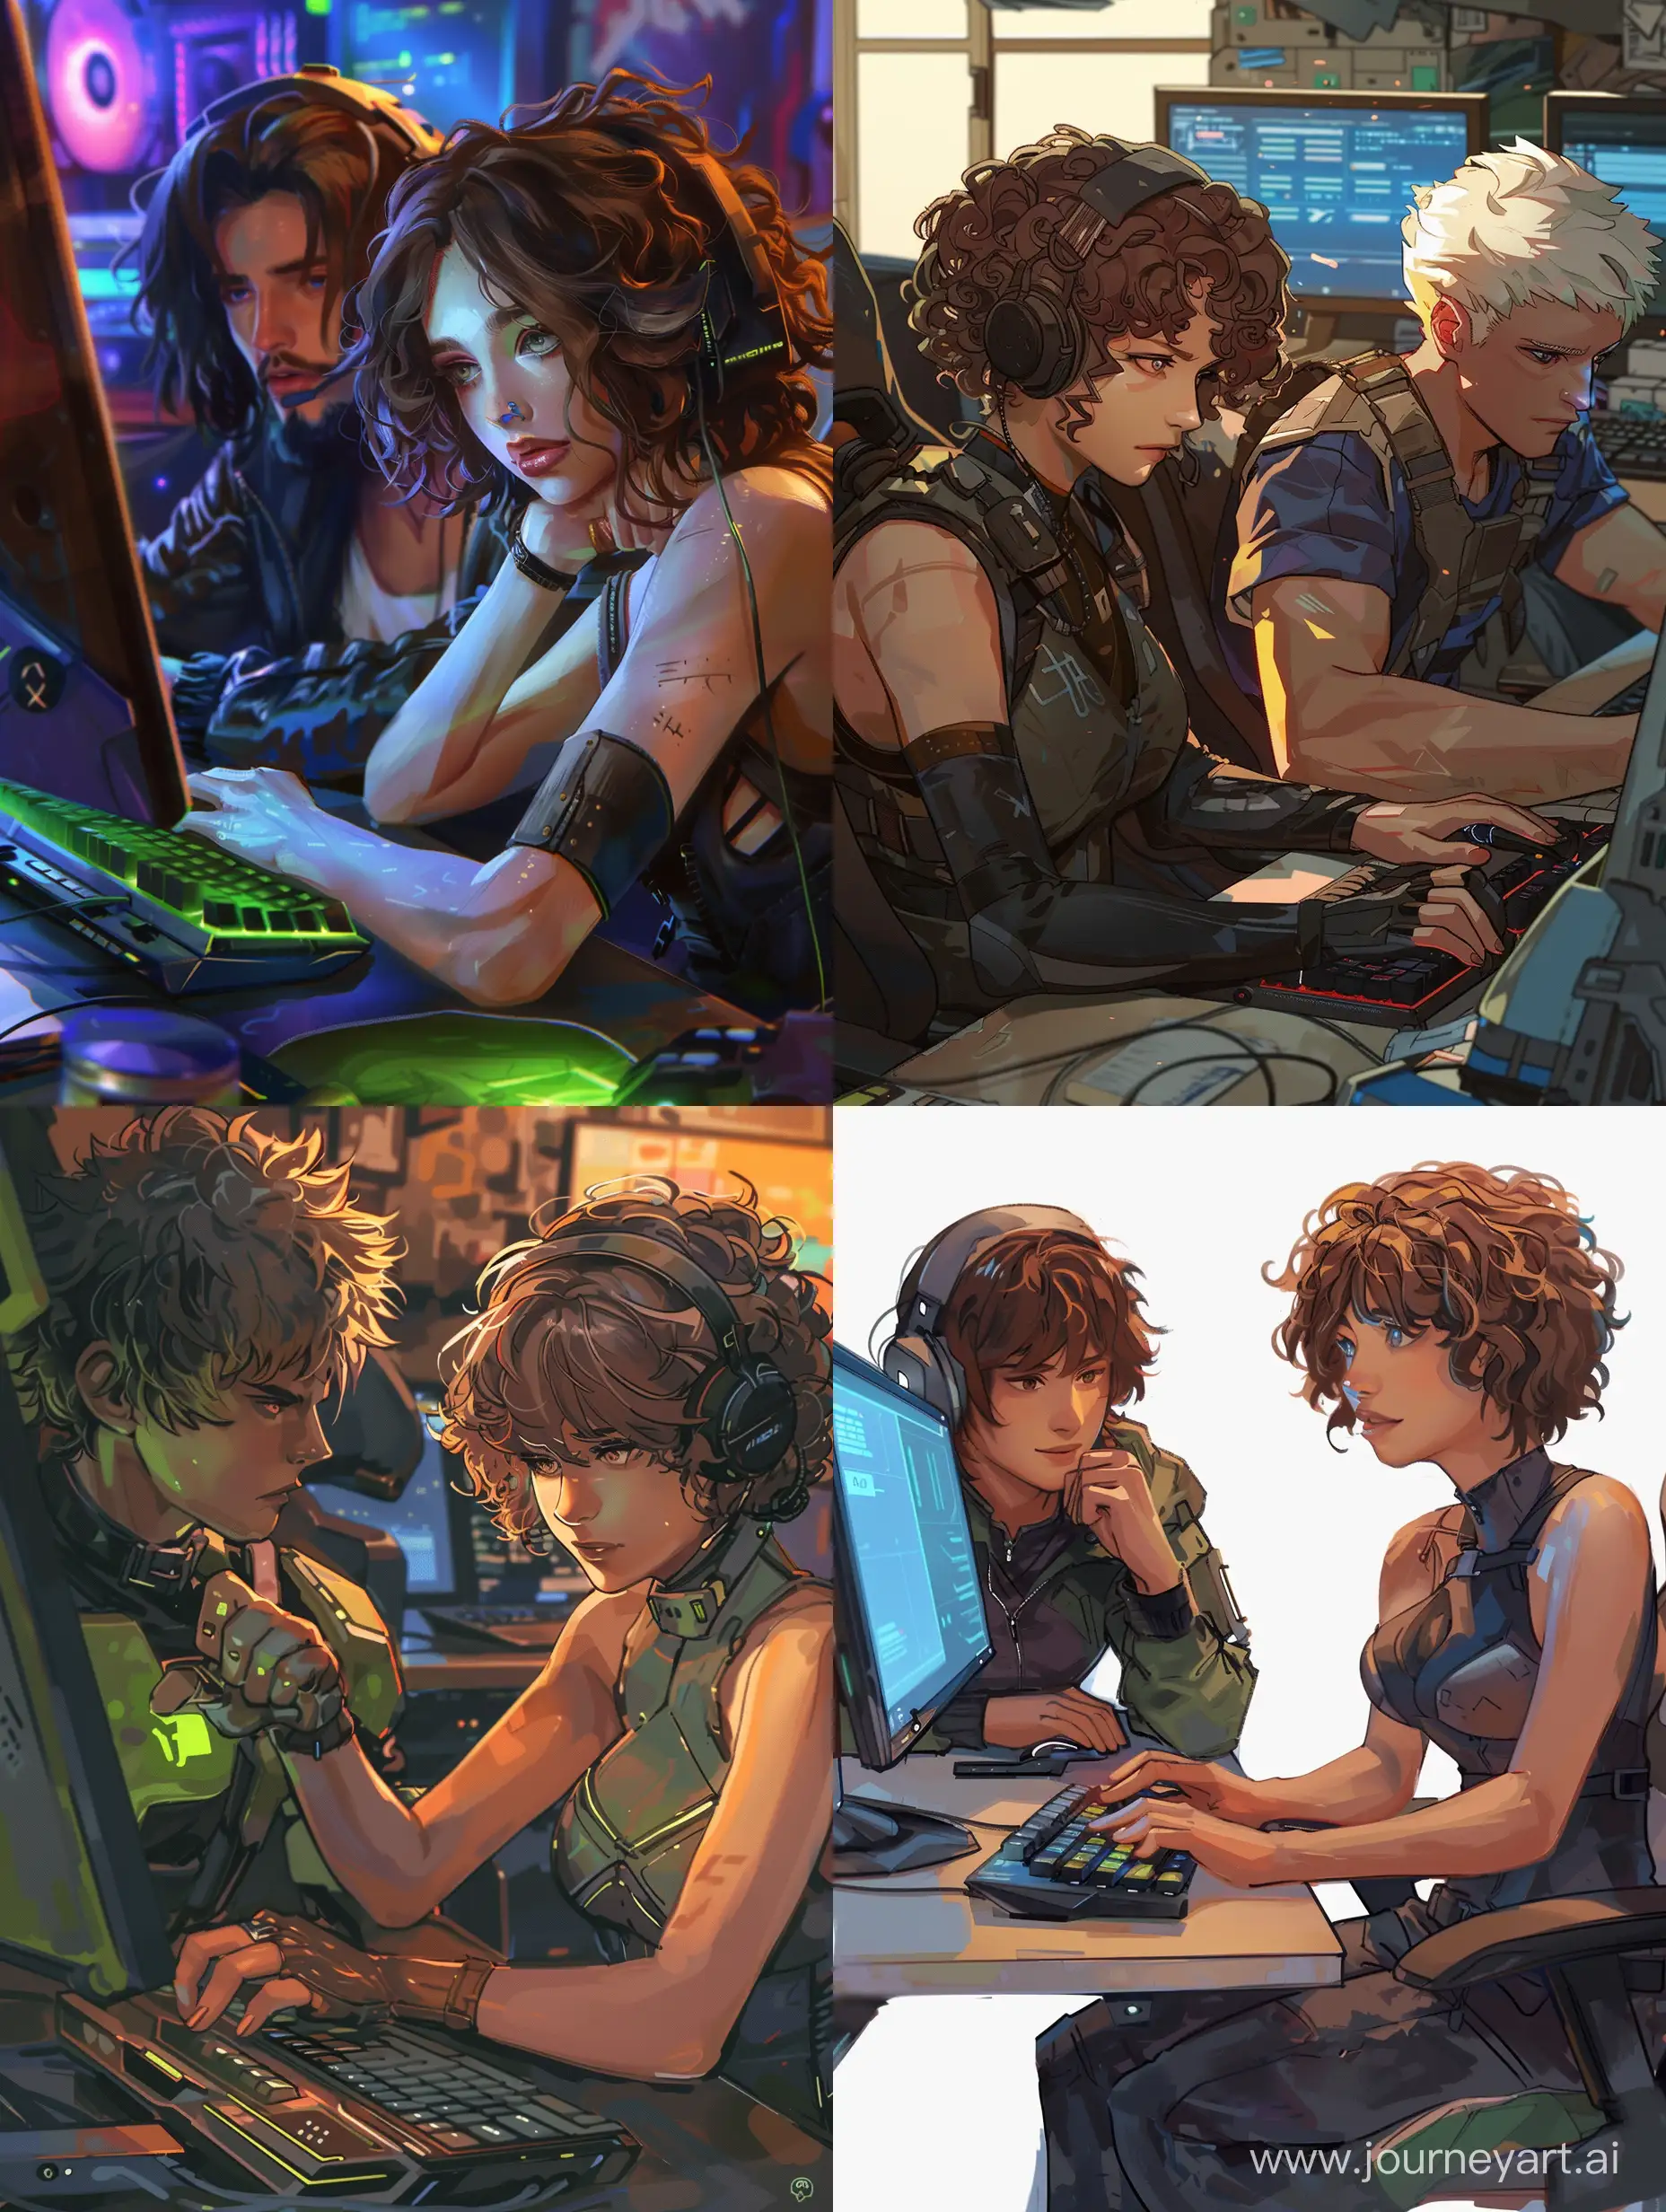 A brooding streamer girl with brown curly short hair is sitting playing at the computer. Grogu is sitting next to her. Cyberpunk Style